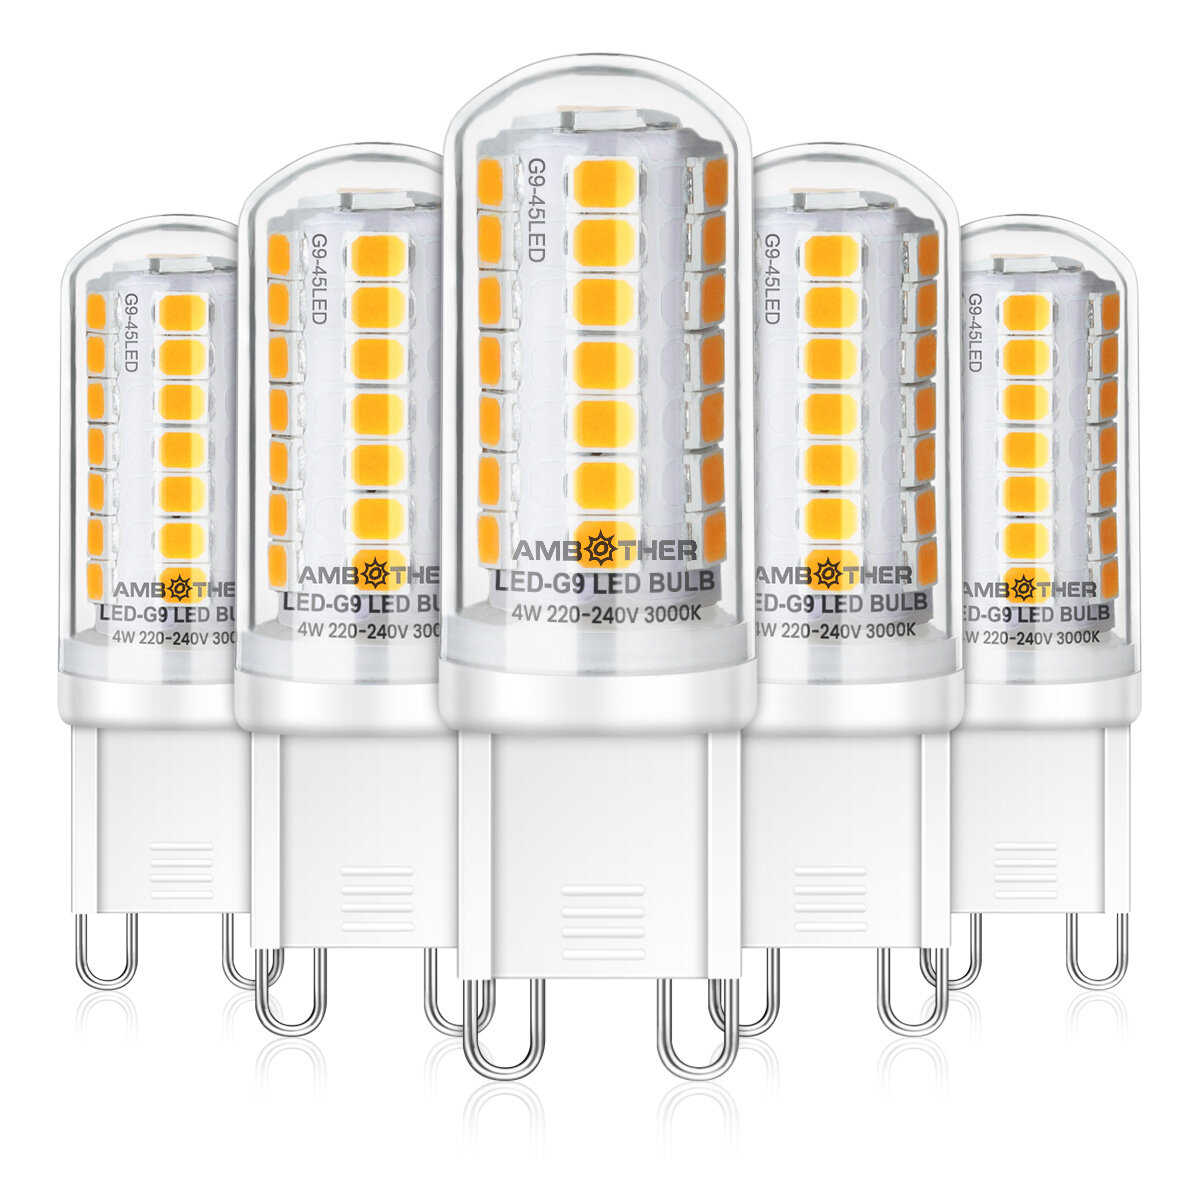 best price,ambother,5pcs,4w,ac,220,240v,g9,led,bulbs,smd2835,eu,coupon,price,discount